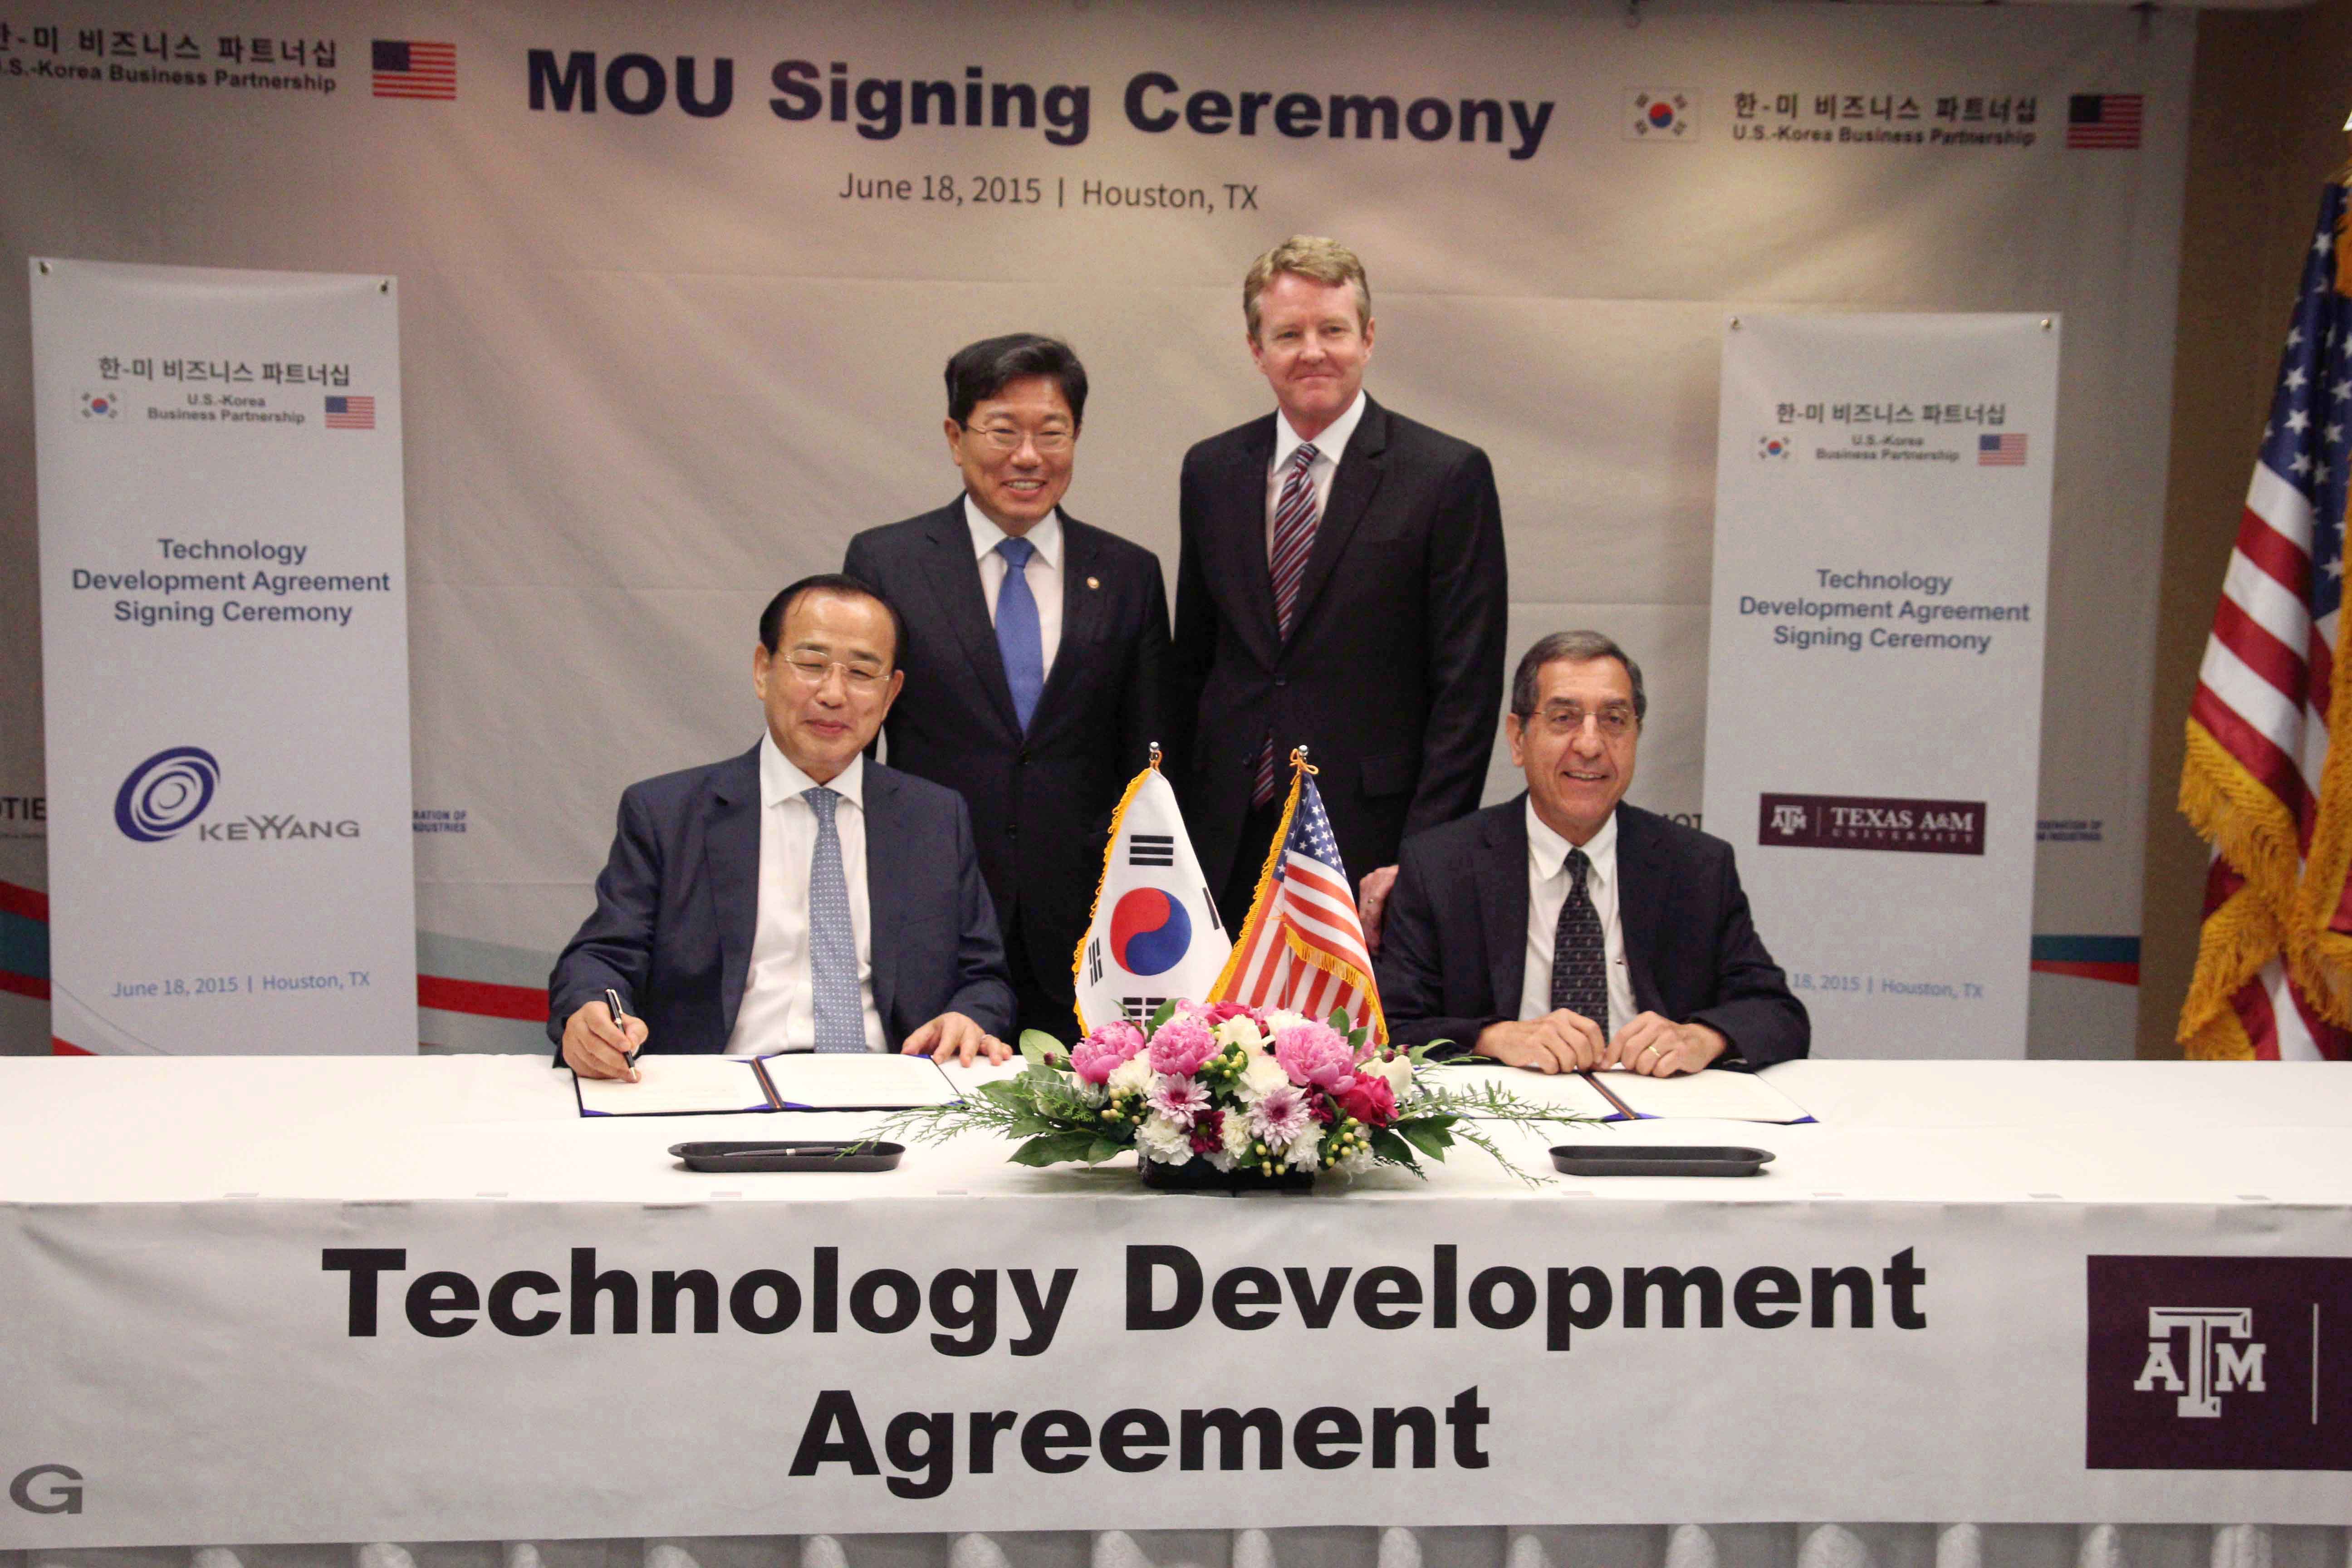 MOU Signing Ceremony Technology Development Agreement Byung Kee Chung, Sang-jick Yoon, Greg Gammon, Dr. Costas Georghiades